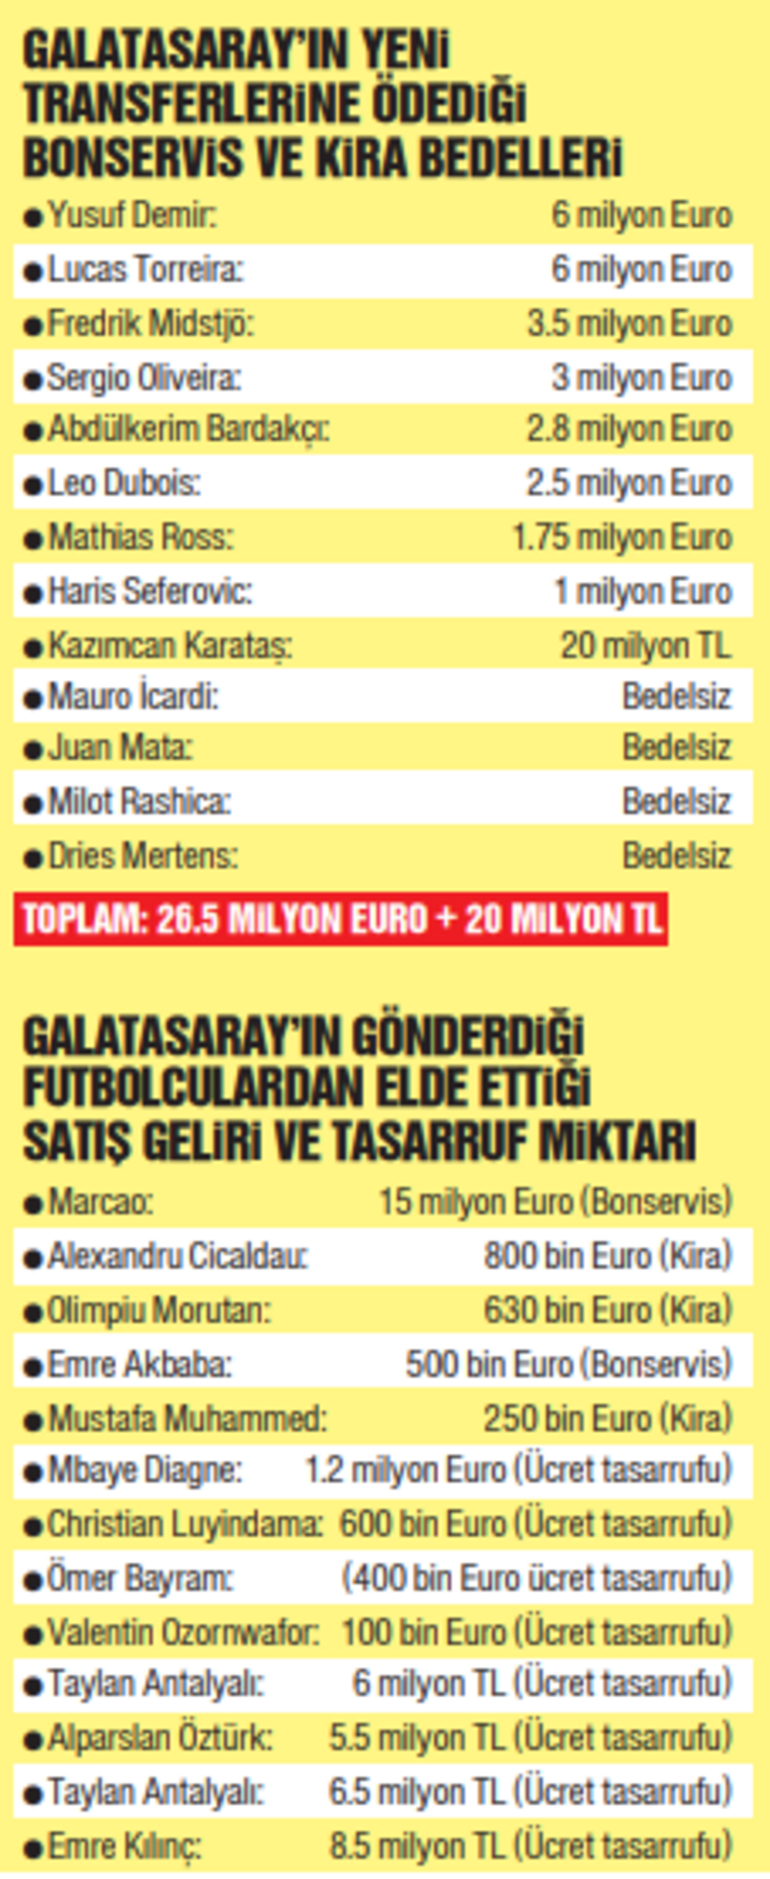 Here is the 27 million euros Galatasaray spent on the transfer